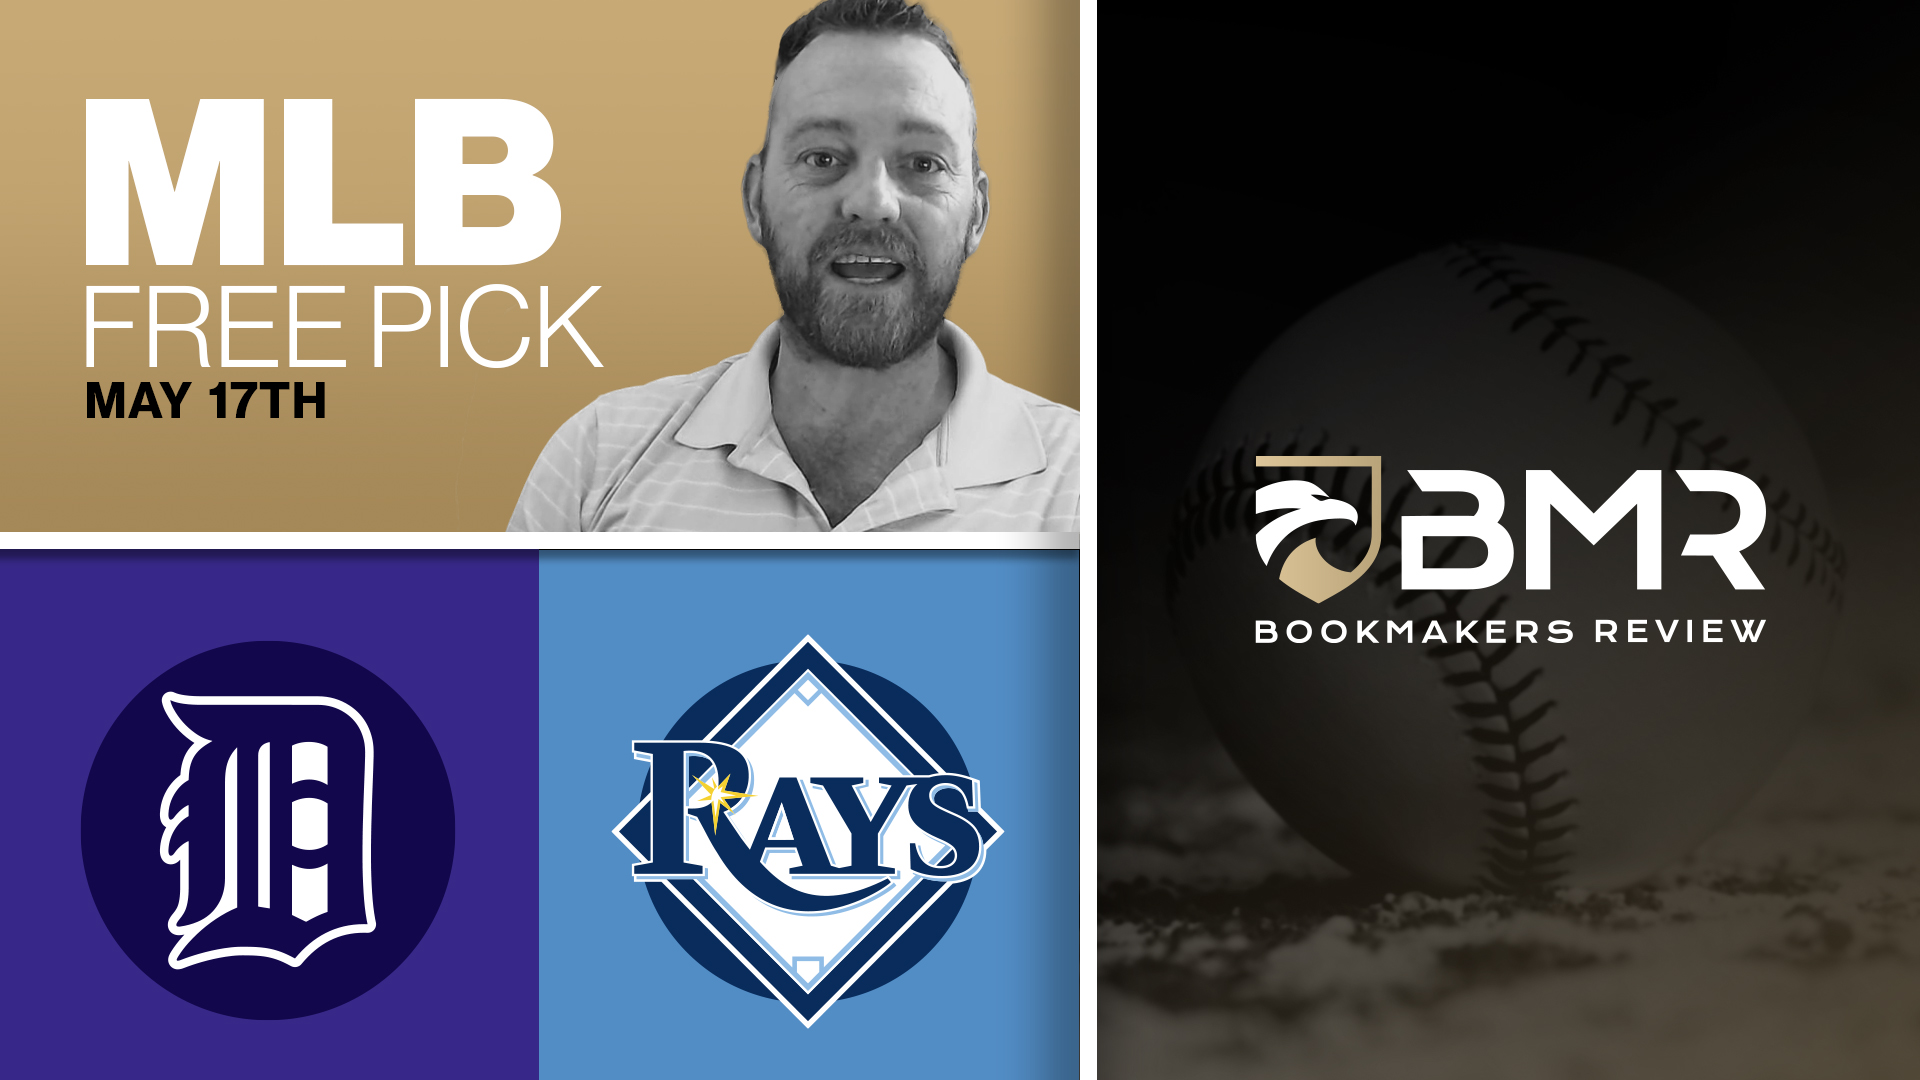 Tigers vs. Rays | Free MLB Pick by Kyle Purviance - May 17th